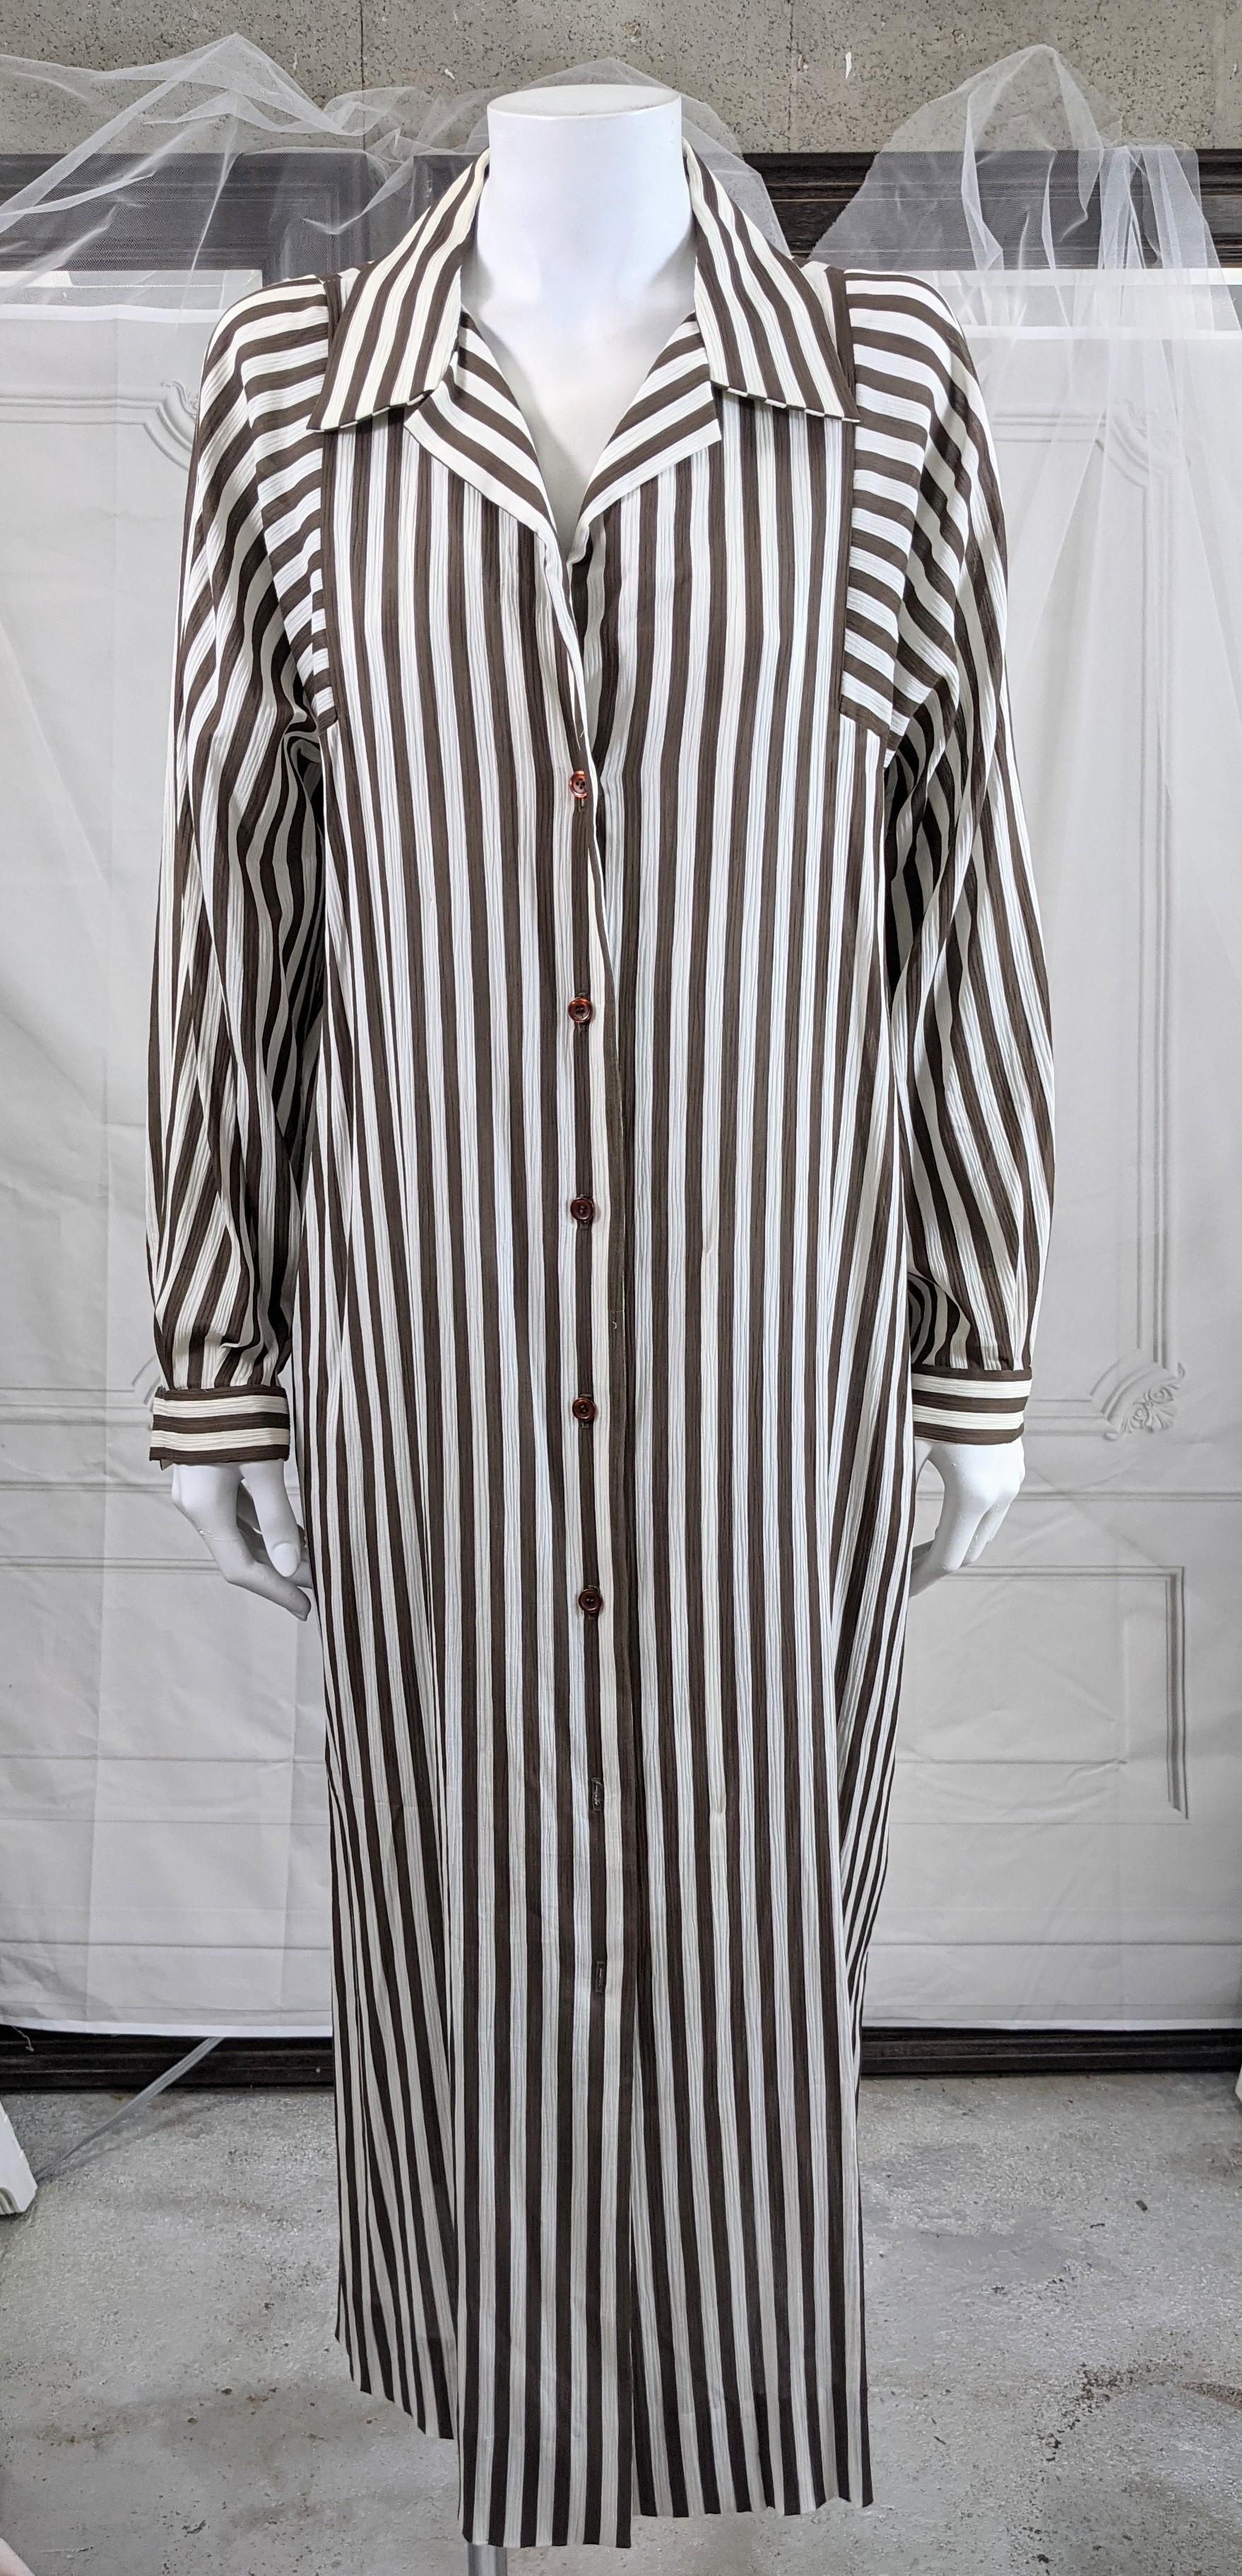 Halston Crinkle Cotton Striped Day Dress For Sale 1